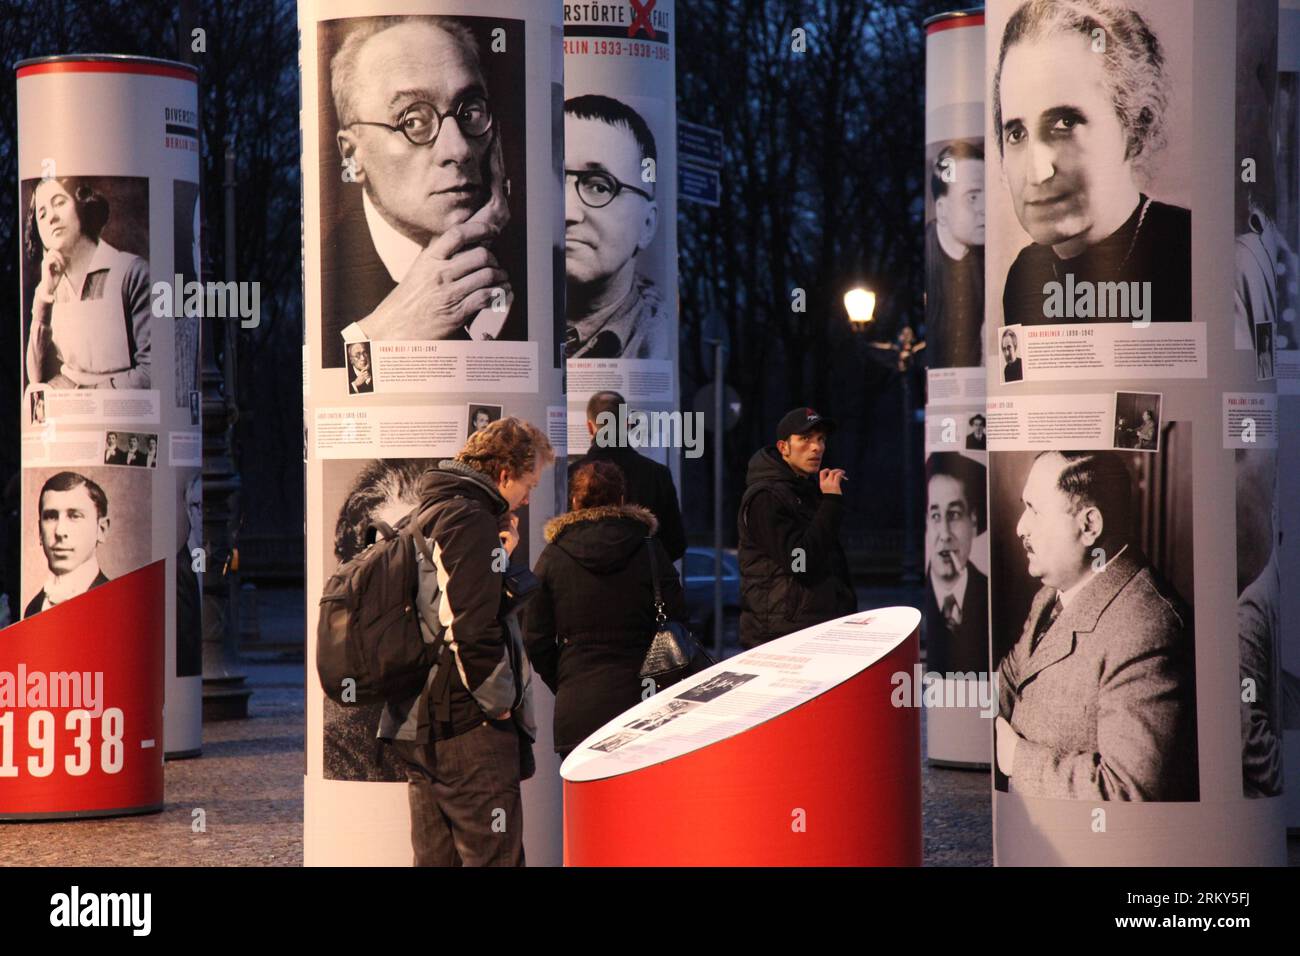 Bildnummer: 59149913  Datum: 29.01.2013  Copyright: imago/Xinhua Visitors view the Diversity Destroyed, Berlin 1933, 1938, 1945 outdoor exhibition in Berlin, Germany, Jan. 29, 2013. The exhibition features portraits of prominent figures in the field of science, artistic and cultural sphere, who were prosecuted by and suffered from the Nazi regime s cruelty dated back to 1933 until 1945. Berlin Municipality kicks off a series of exhibitions, to remind of the 80th anniversary of Adolf Hitler s usurpation of German power on January 30, 1933. (Xinhua/Pan Xu) (dtf) GERMANY-BERLIN-PERSECUTION-NAZI-E Stock Photo